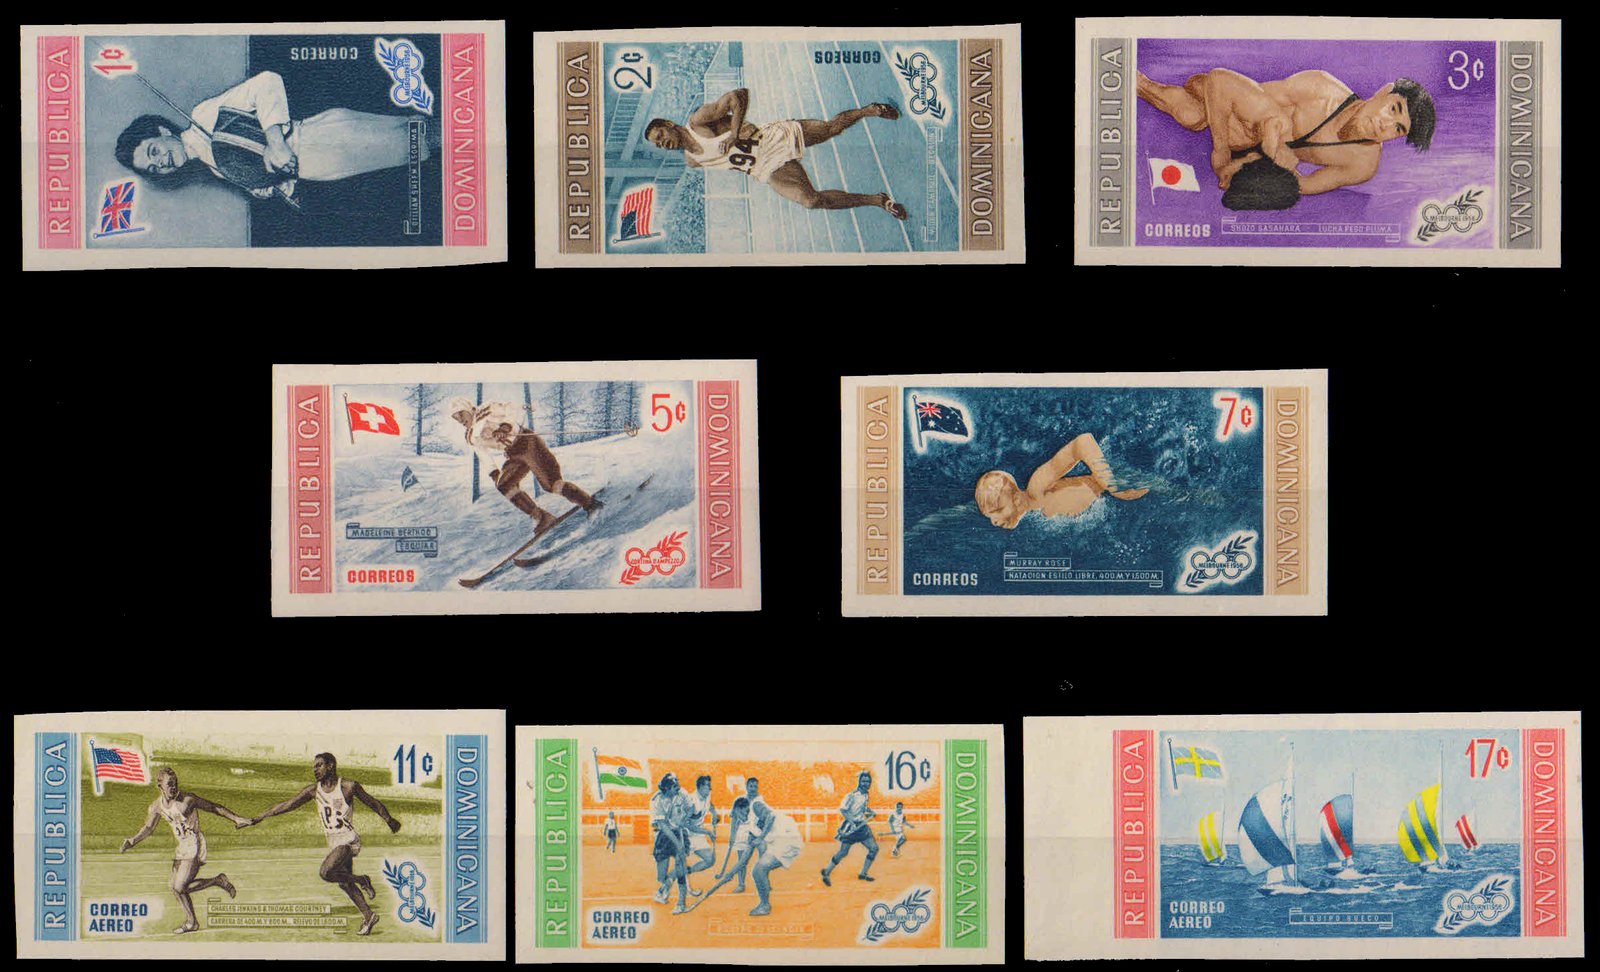 DOMINICAN REPUBLIC 1958-Olympic Games, Winning Athletes, Hockey & Indian Flags in National Colors, Imperf Set of 8, MNH, S.G. 748-756